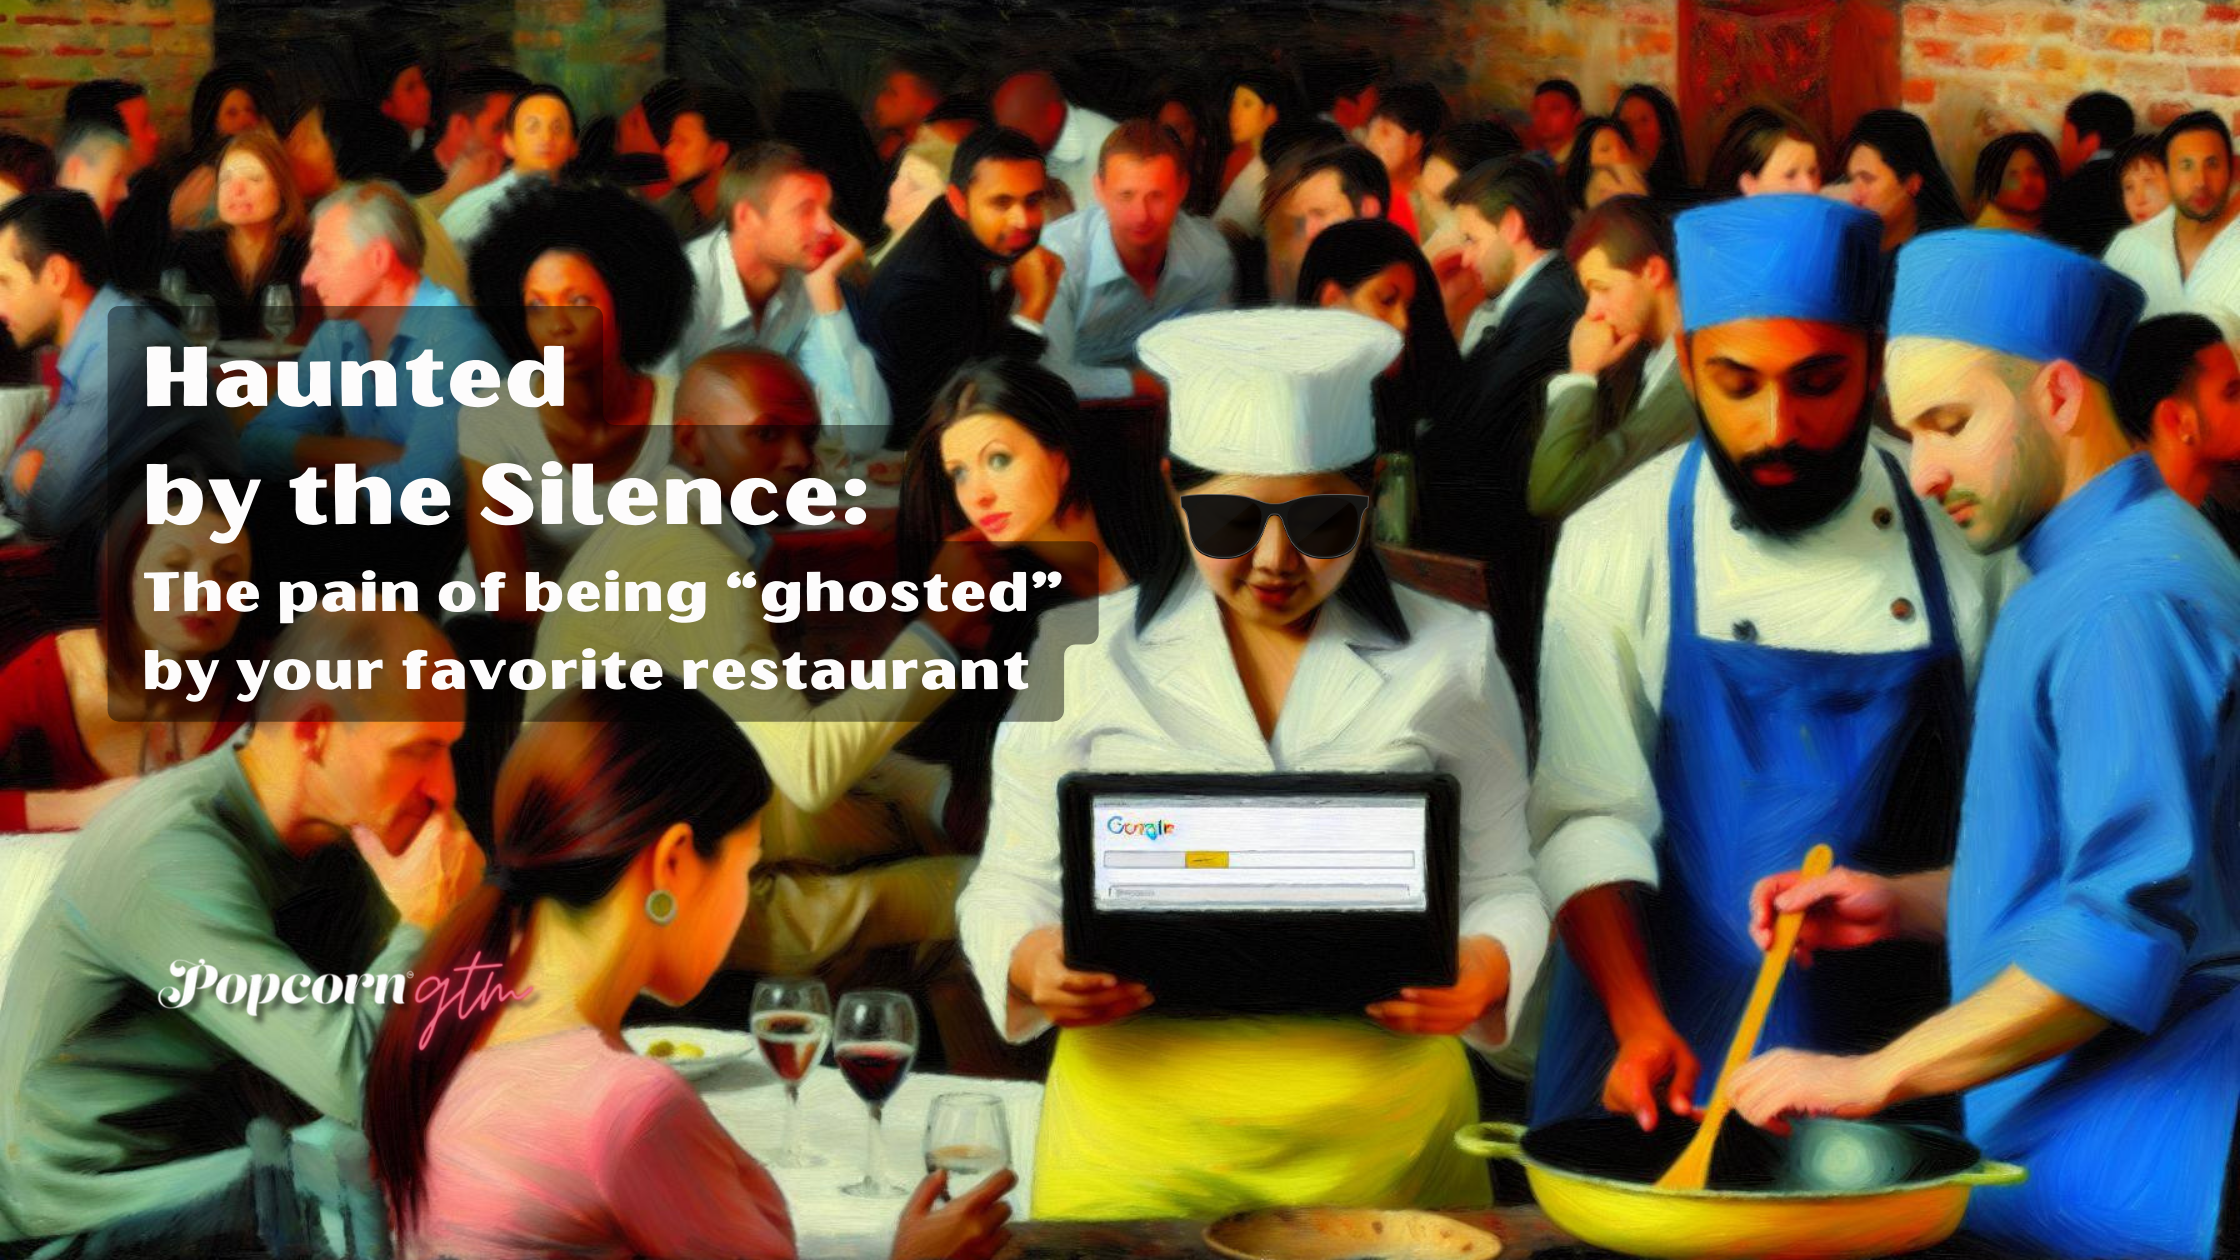 https://44217588.fs1.hubspotusercontent-na1.net/hubfs/44217588/Haunted%20by%20Silence.png